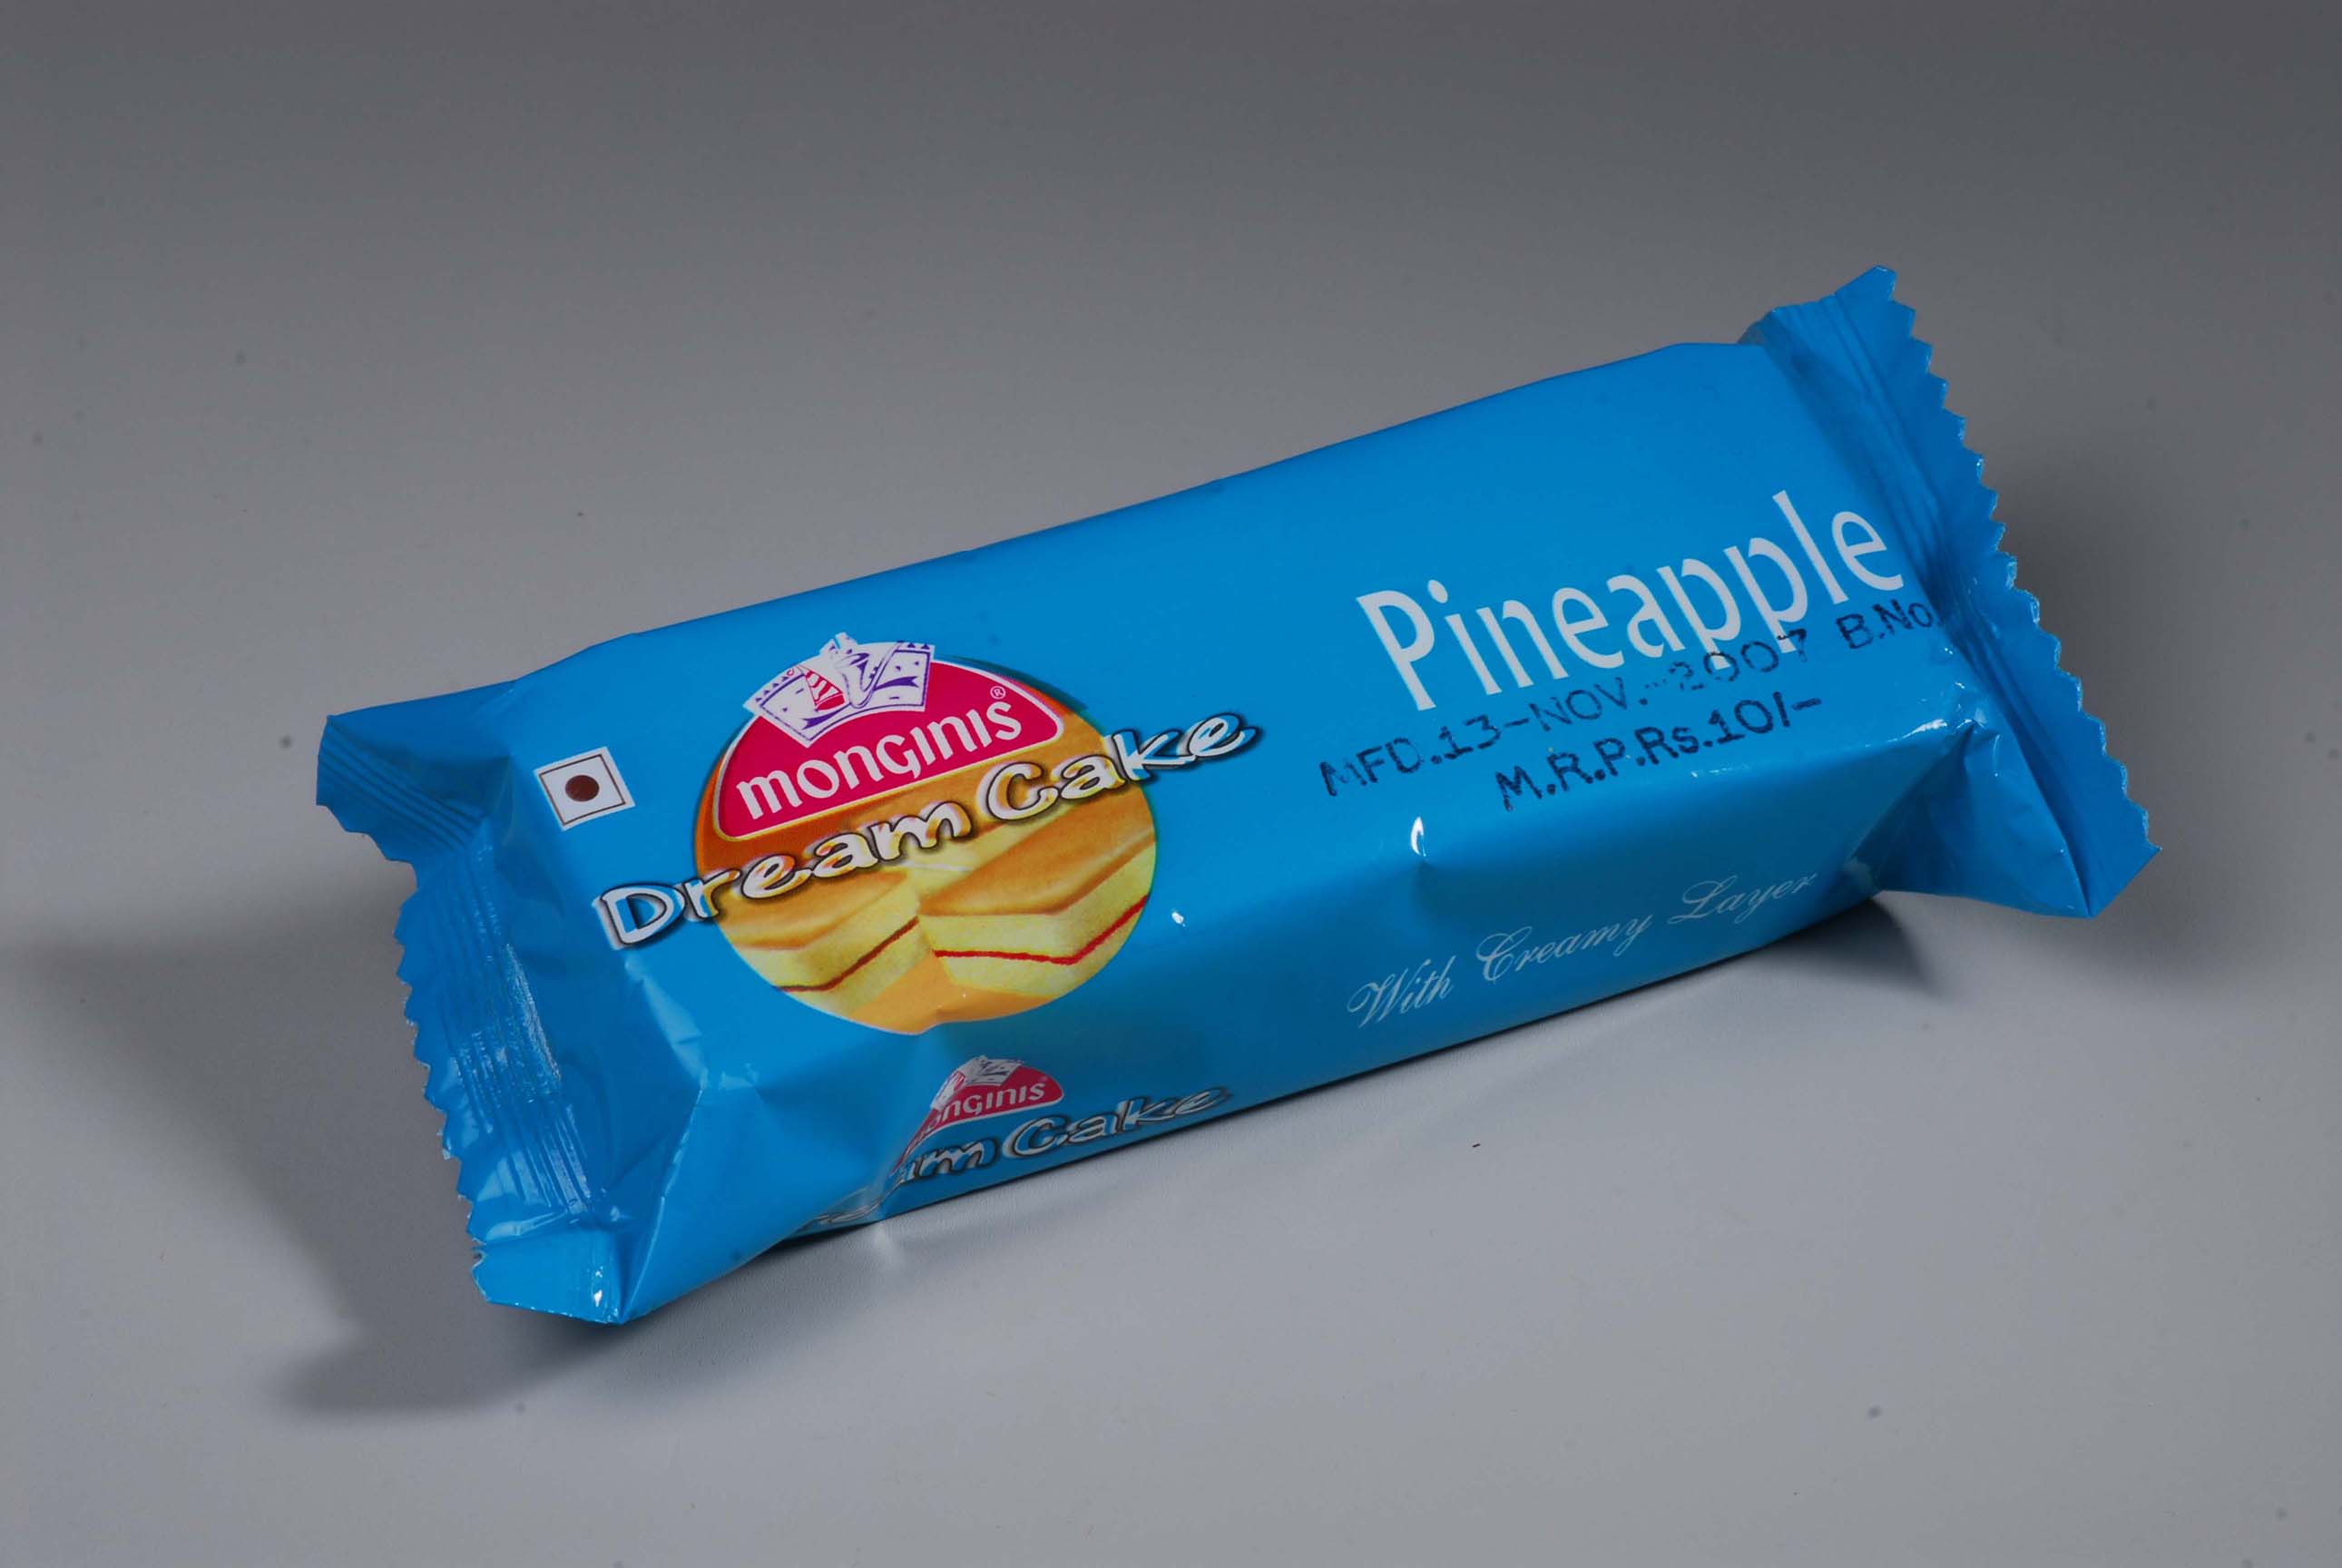 Monginis India - Pineapple pastry is the perfect balance between cake and  fruits, who wouldn't enjoy this delicate and fluffy pastry? Try it only at  Rs. 40, at a Monginis store today: